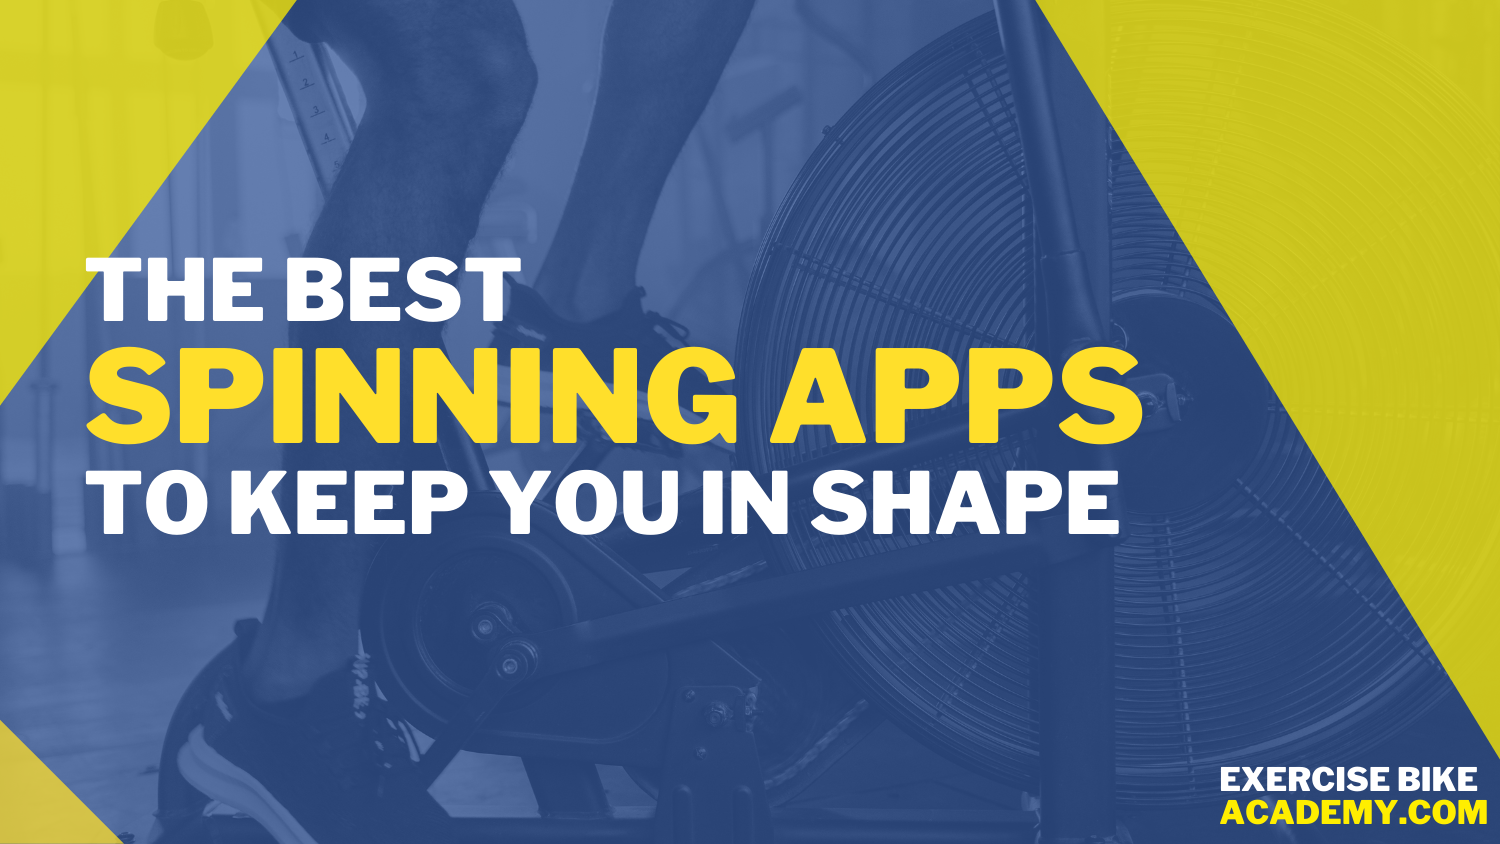 Best Spinning Apps: 6 Amazing Apps To Keep You Fit at Home